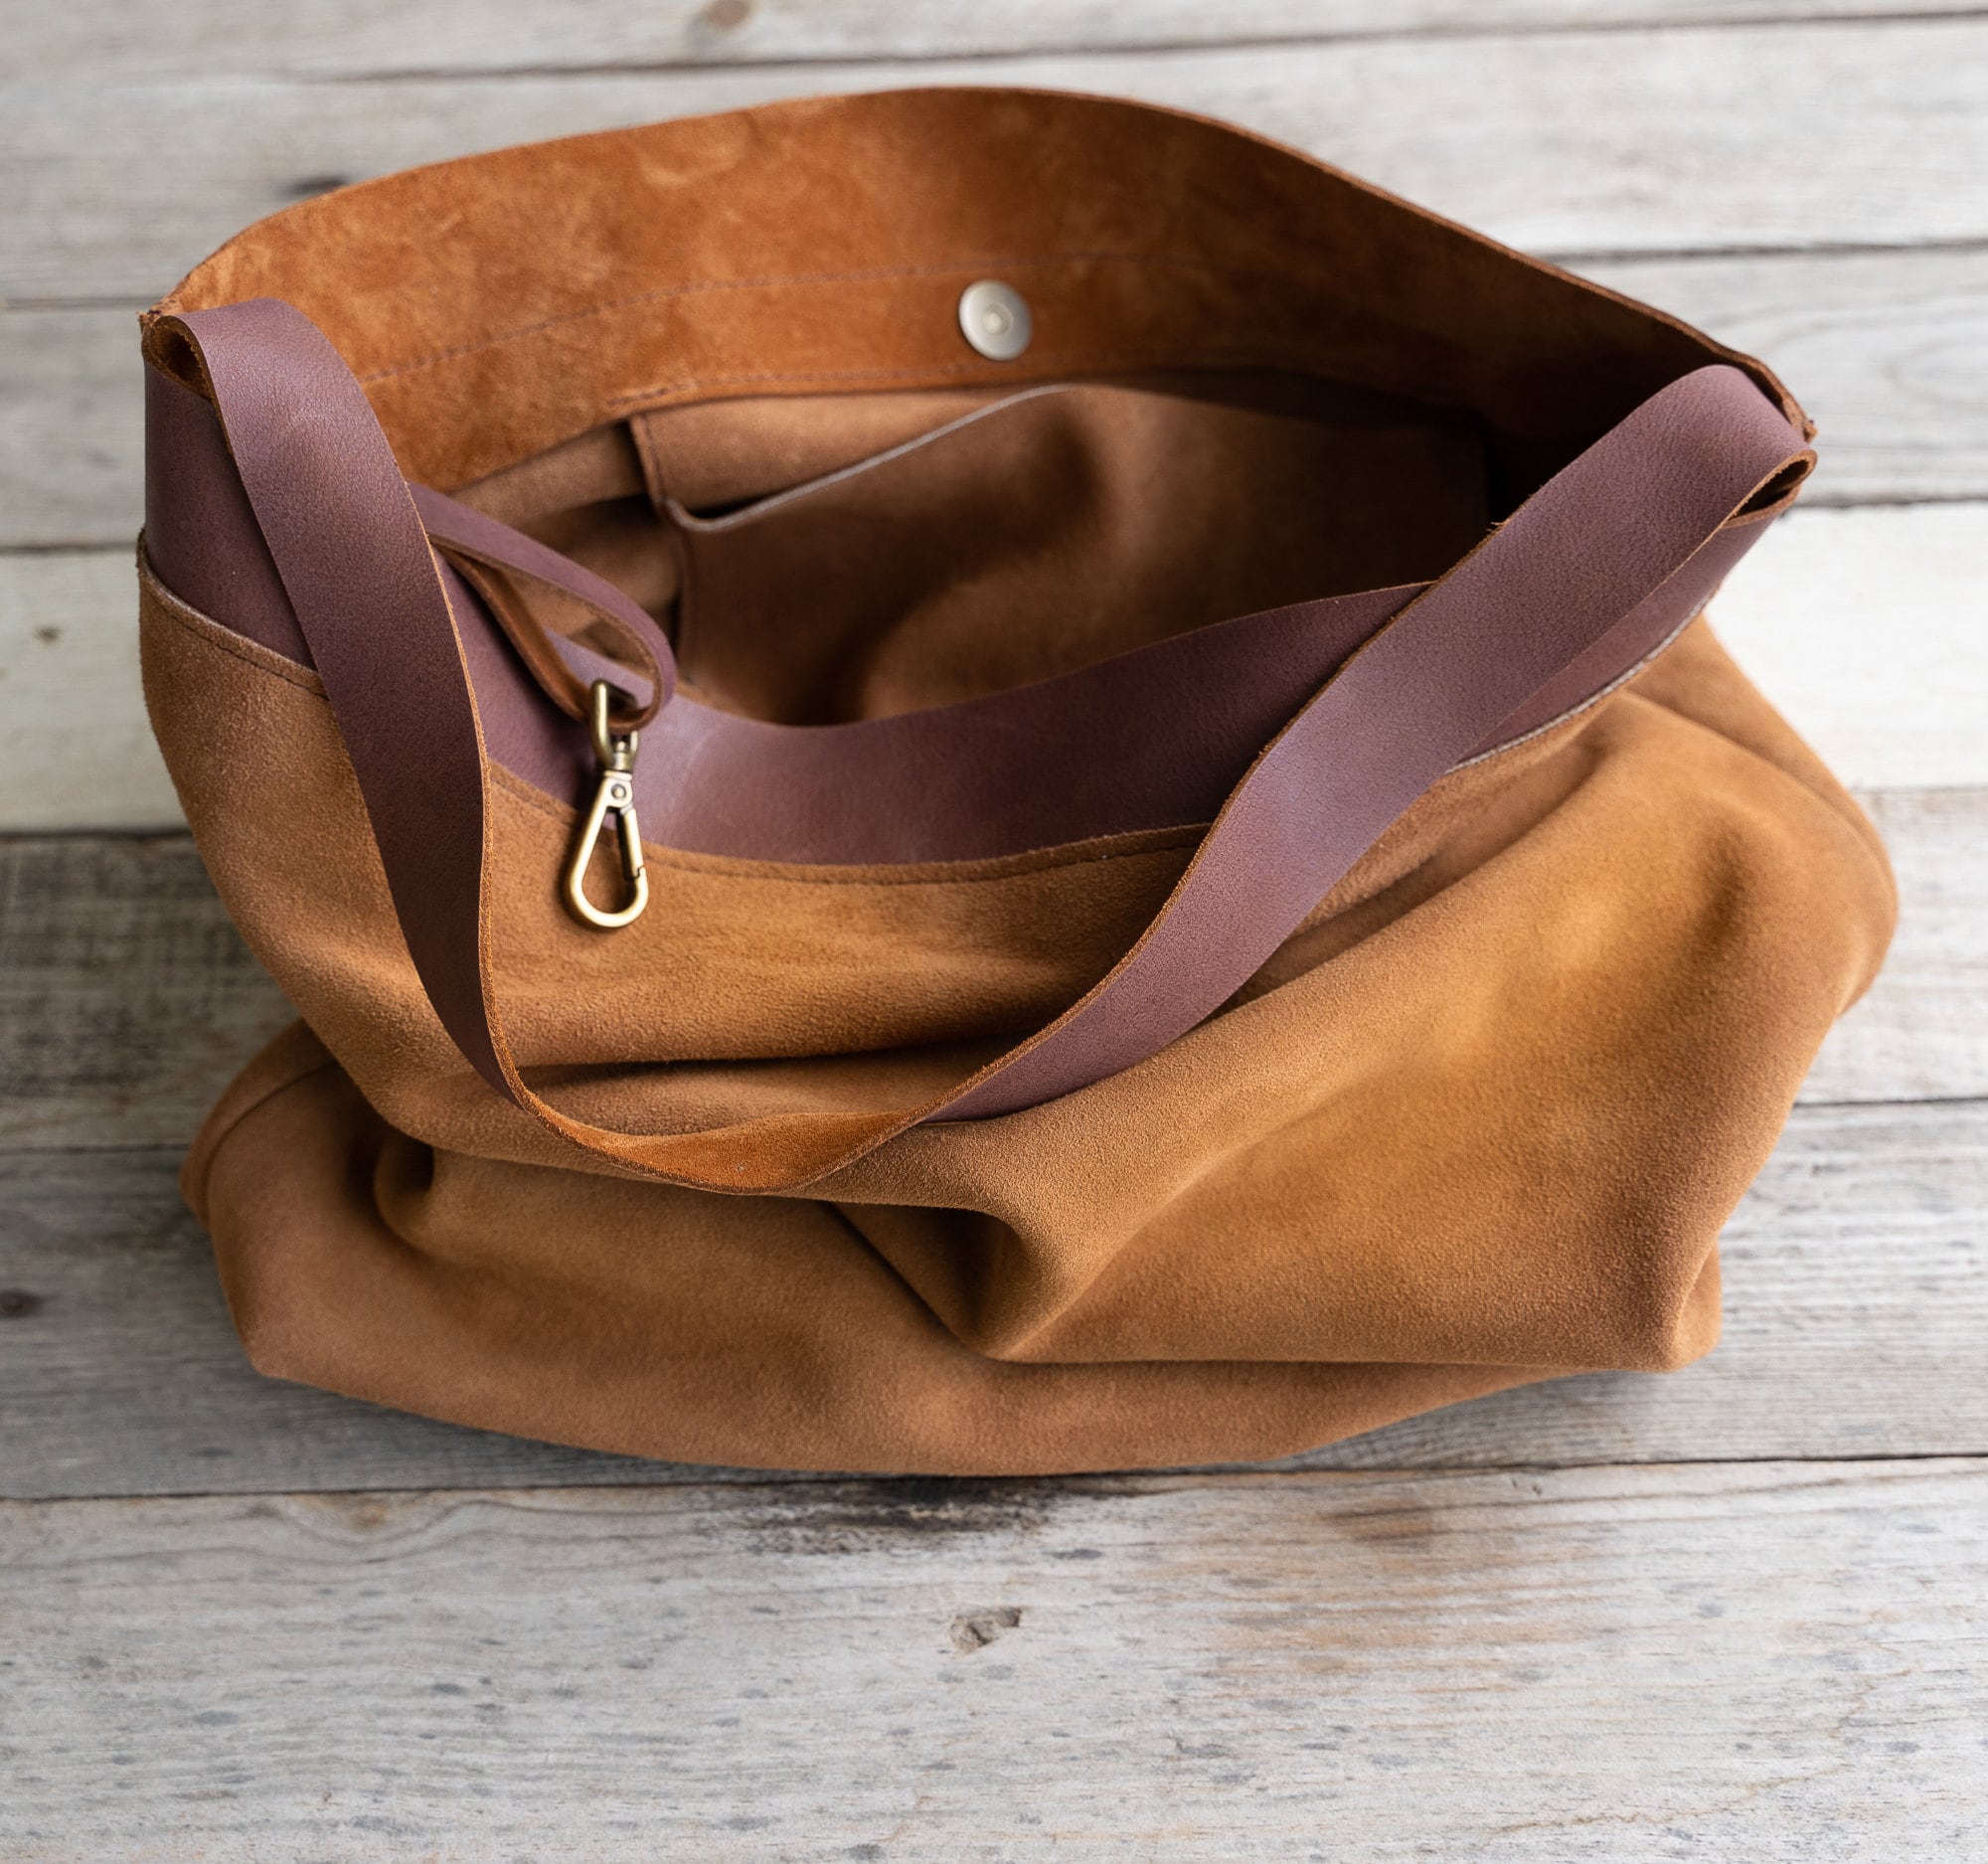  K Marina Designs, Rustic Leather Tote Handmade from Full Grain  Leather - Women's Bag Accessories, Designer Handbags, Purses, Totes -  Lightweight Materials, Great for Everyday Use and Travel (Brown) : Handmade  Products